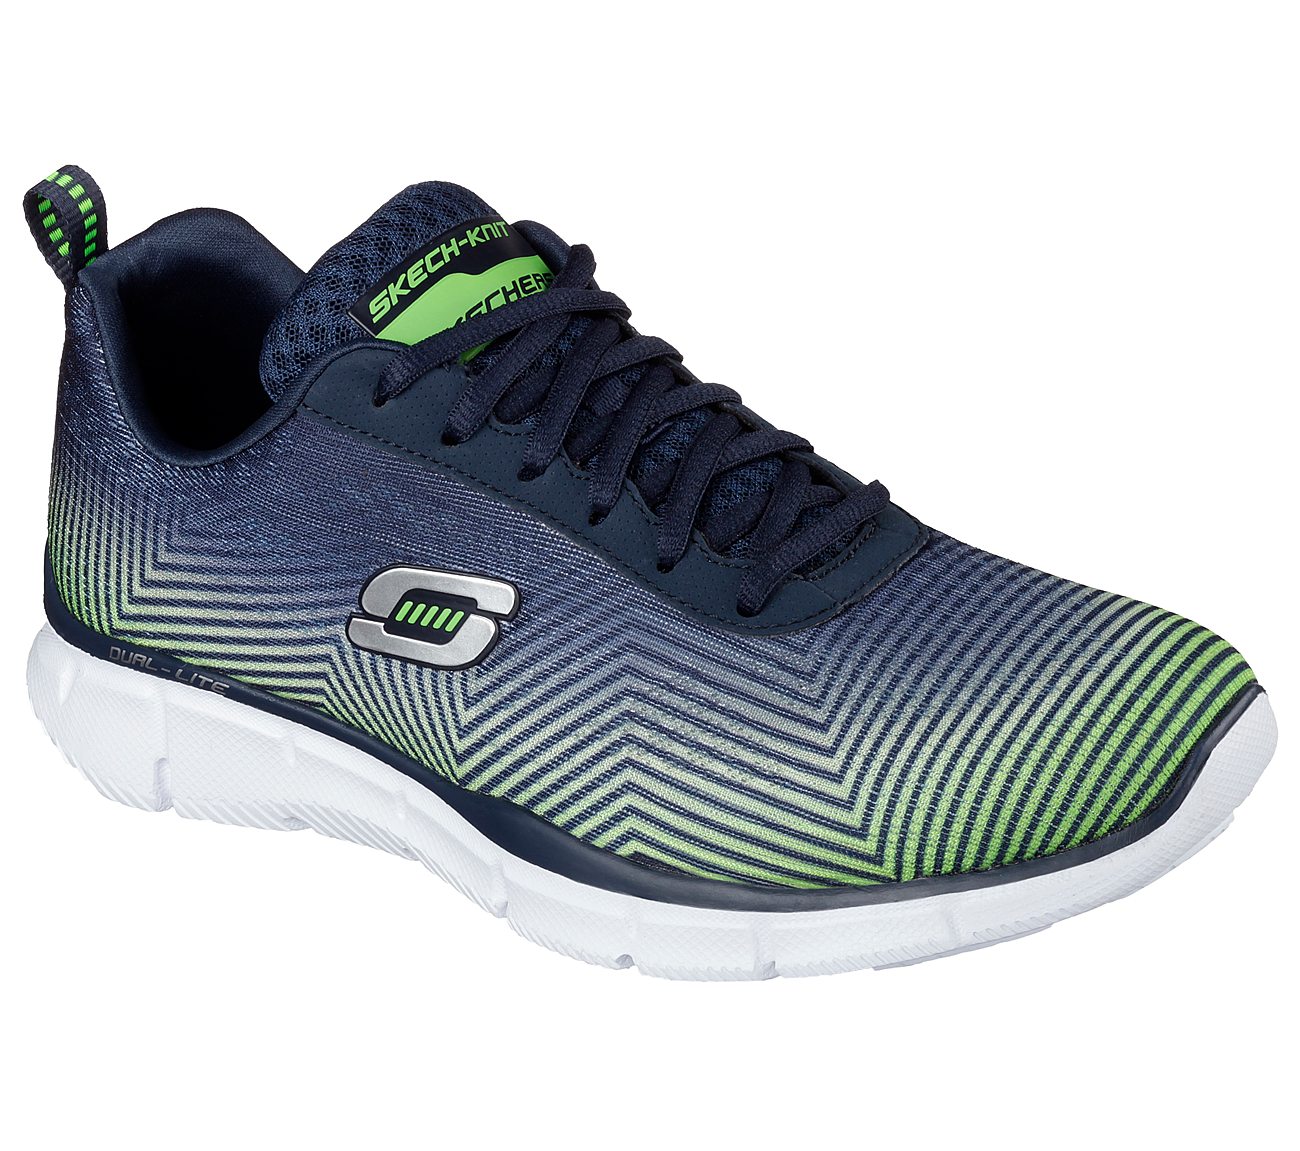 Game Day SKECHERS Sport Shoes